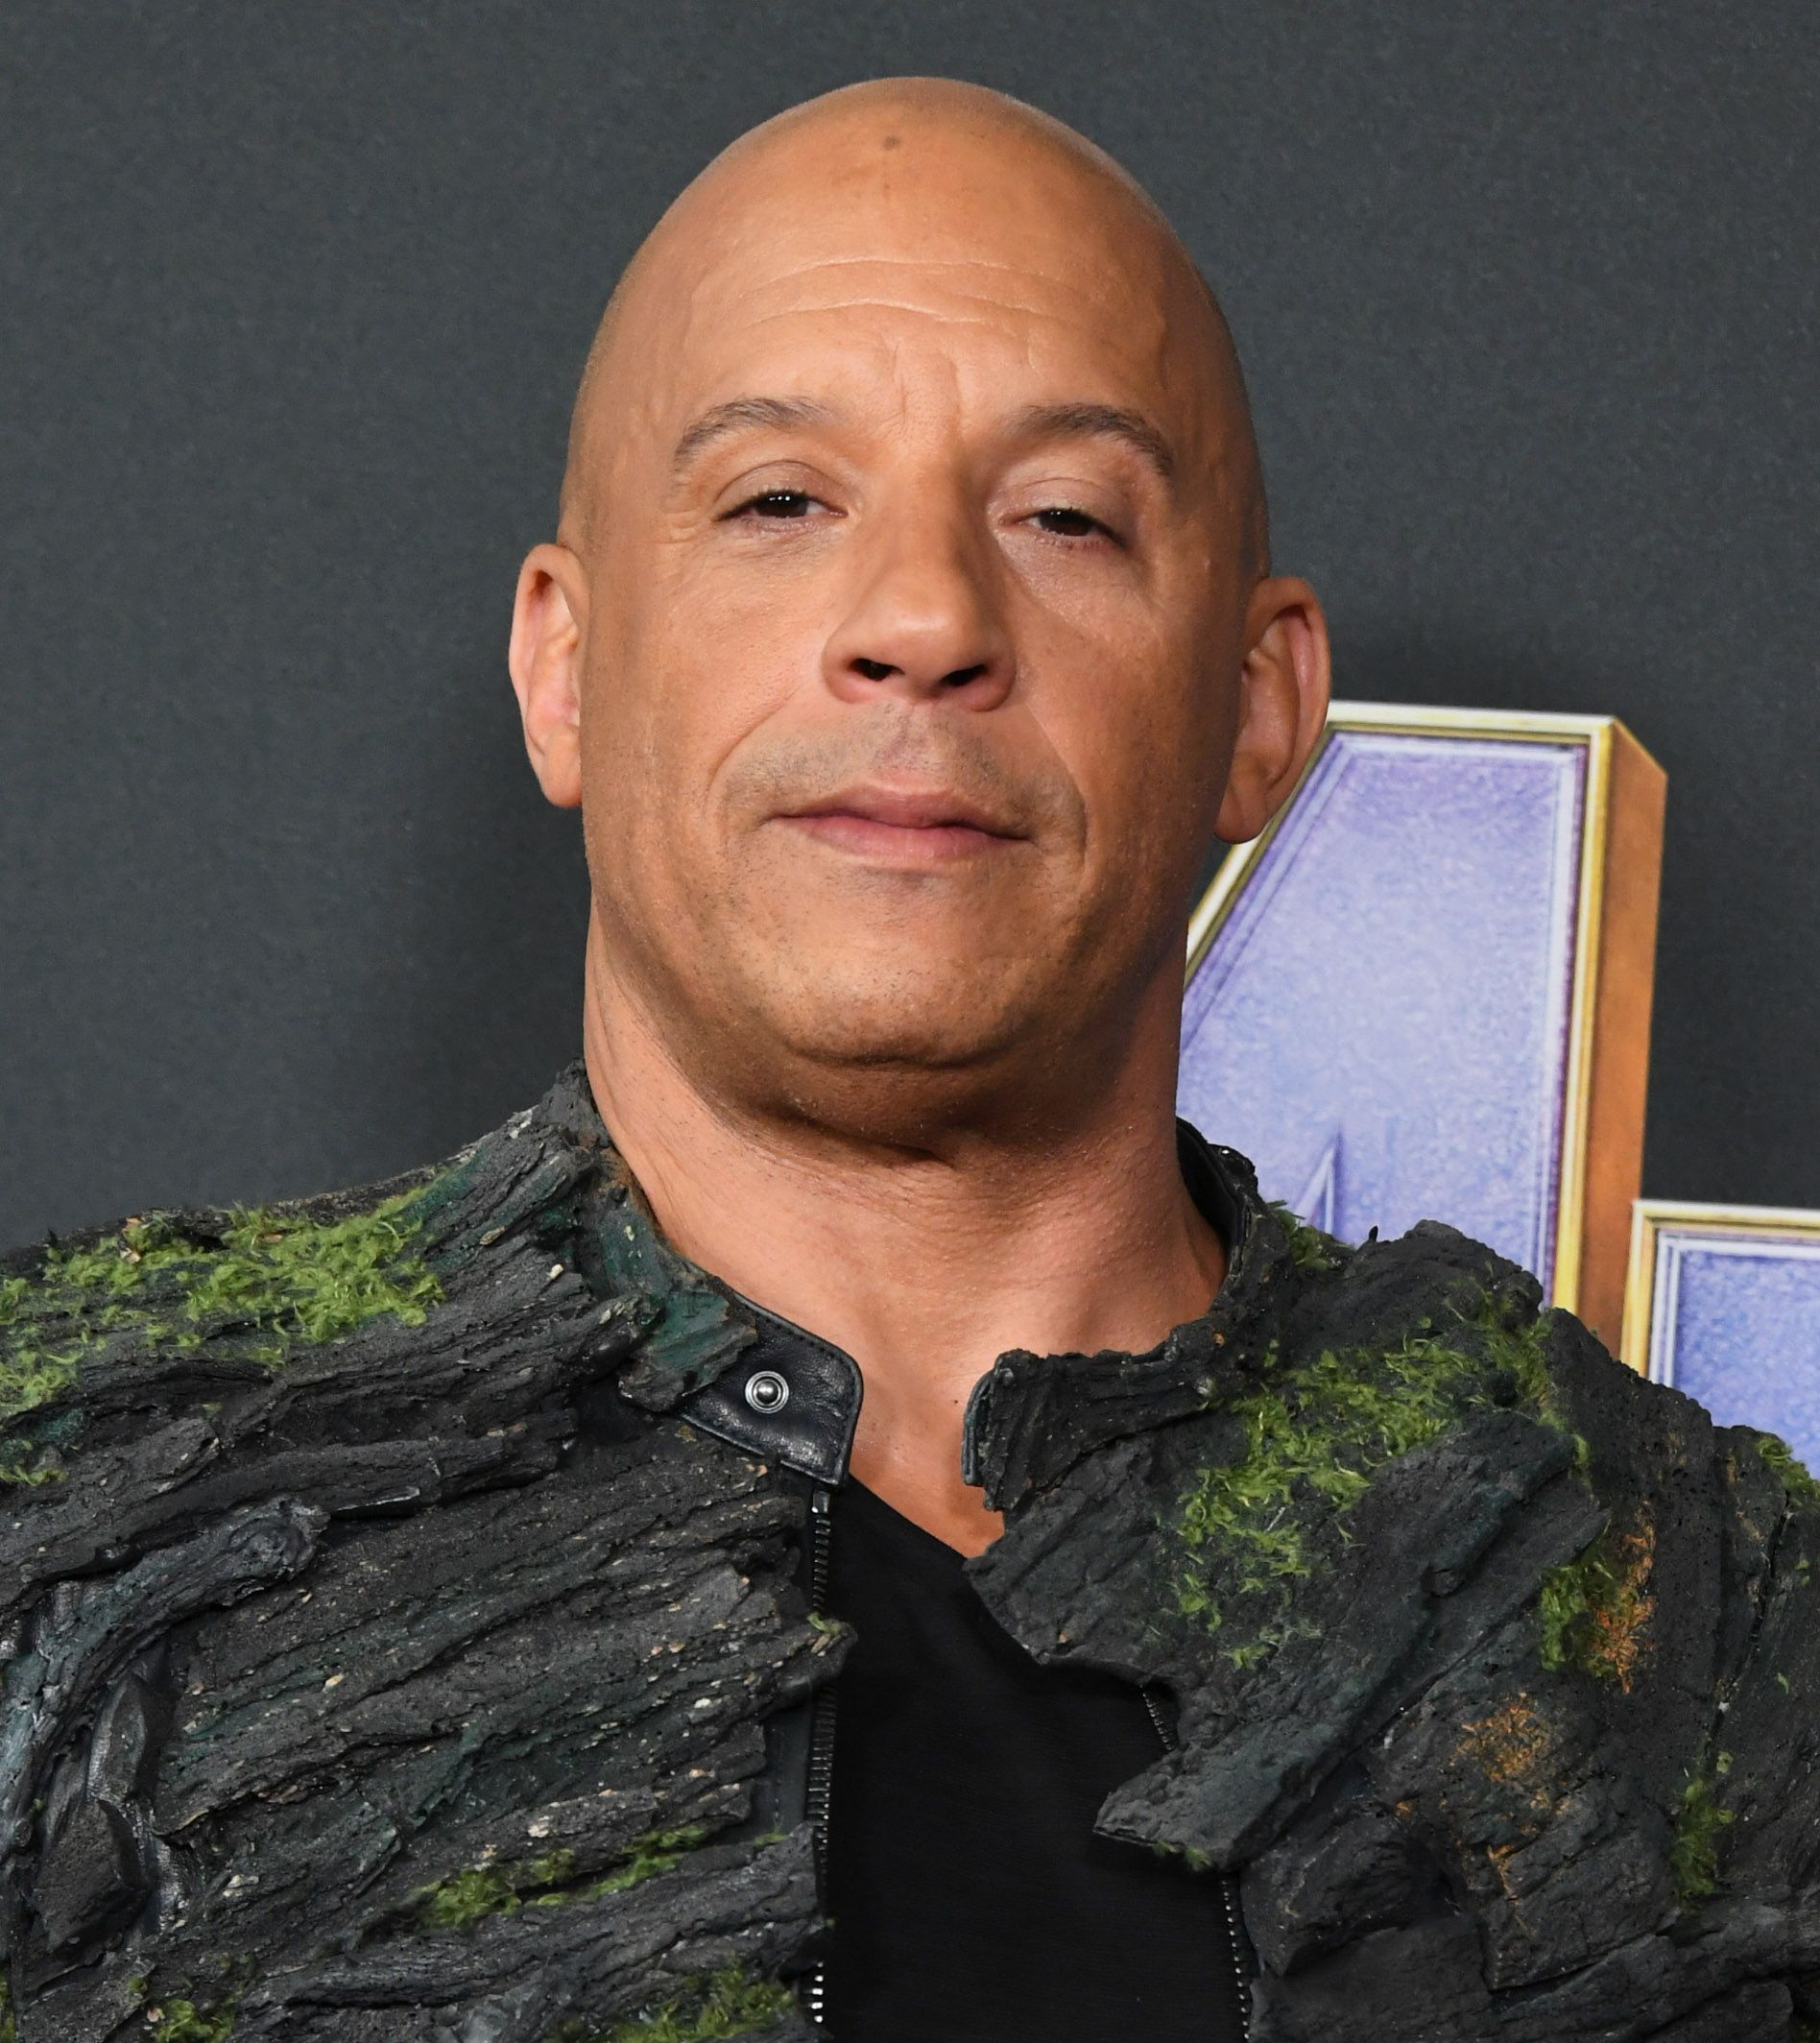 Vin Diesel at the world premiere of "Avengers: Endgame" at Los Angeles Convention Center on April 22, 2019, in California | Photo: Jon Kopaloff/Getty Images